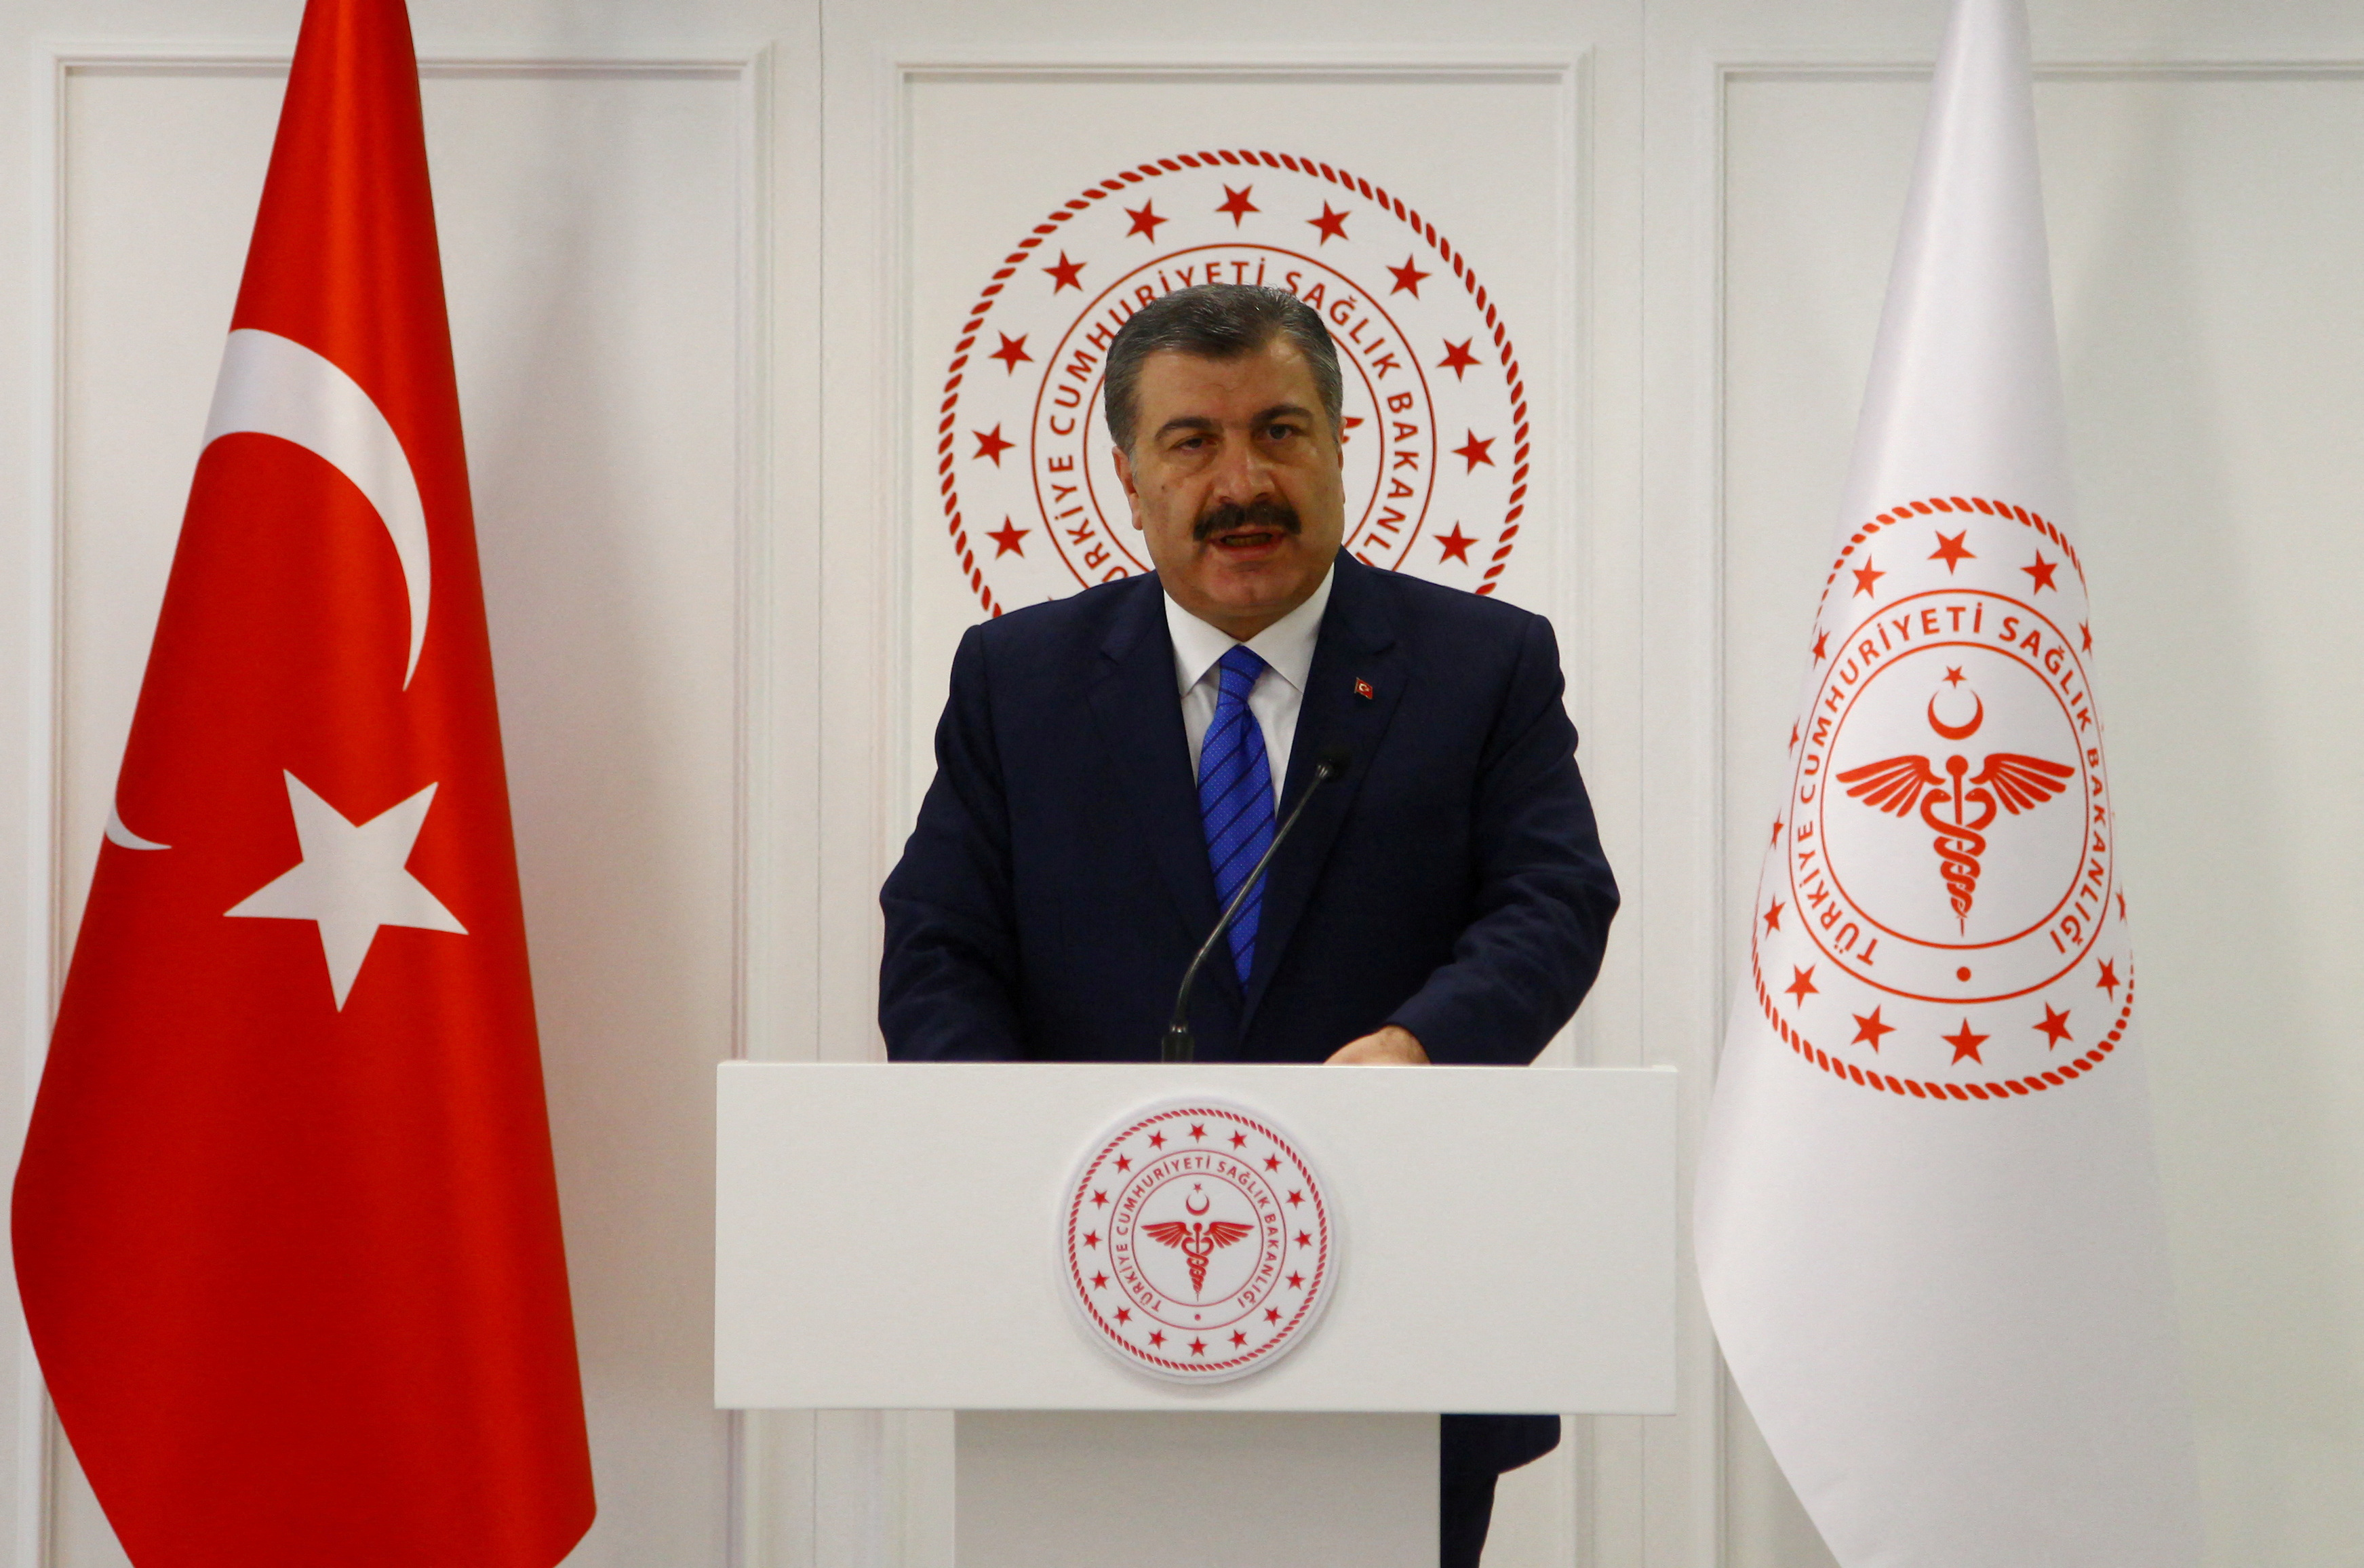 Turkish Health Minister Koca speaks during a news conference in Ankara